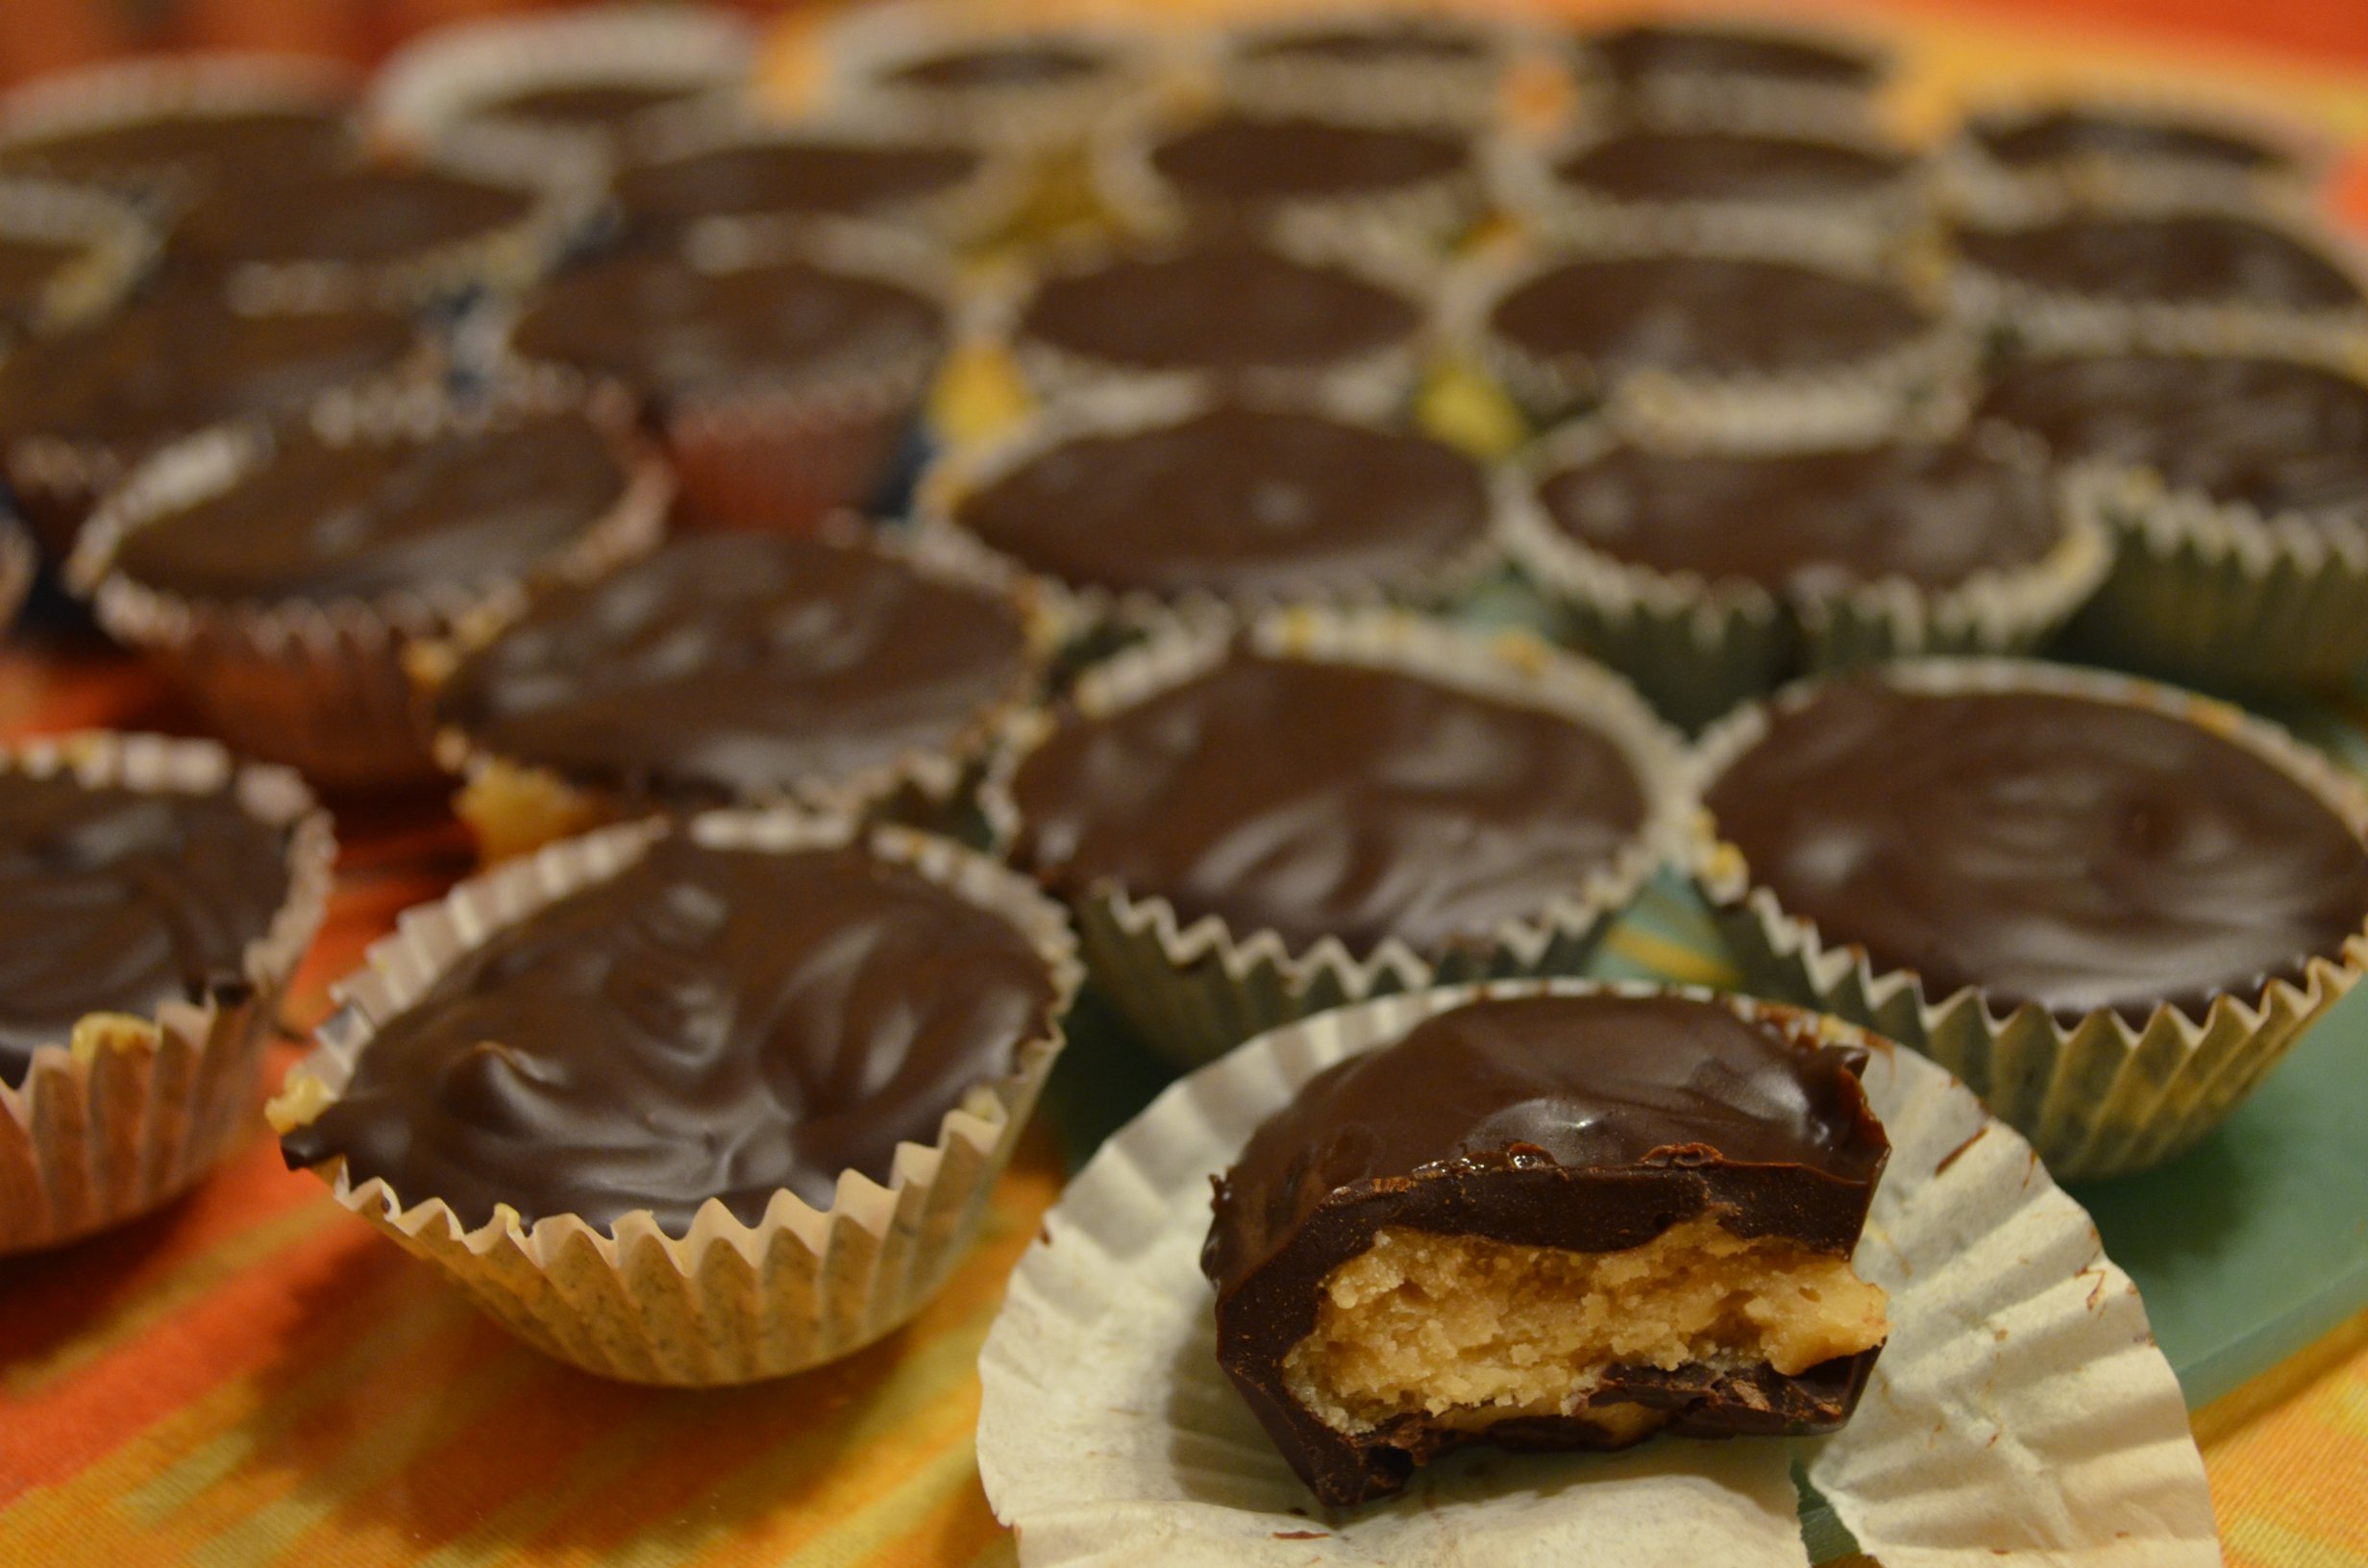 Peanut Butter Cups like Reese's